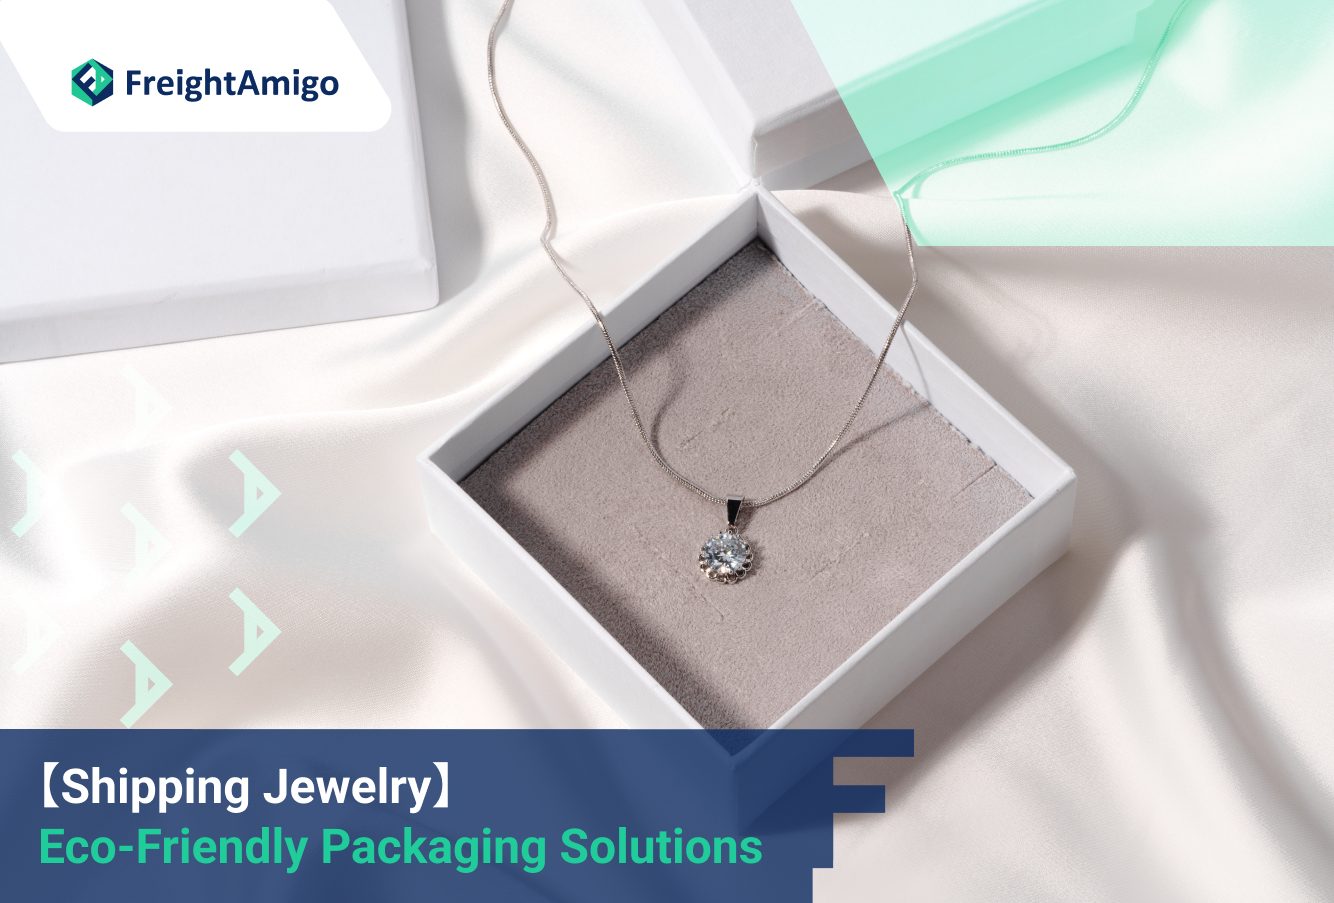 Eco-Friendly Packaging Solutions for Shipping Jewelry